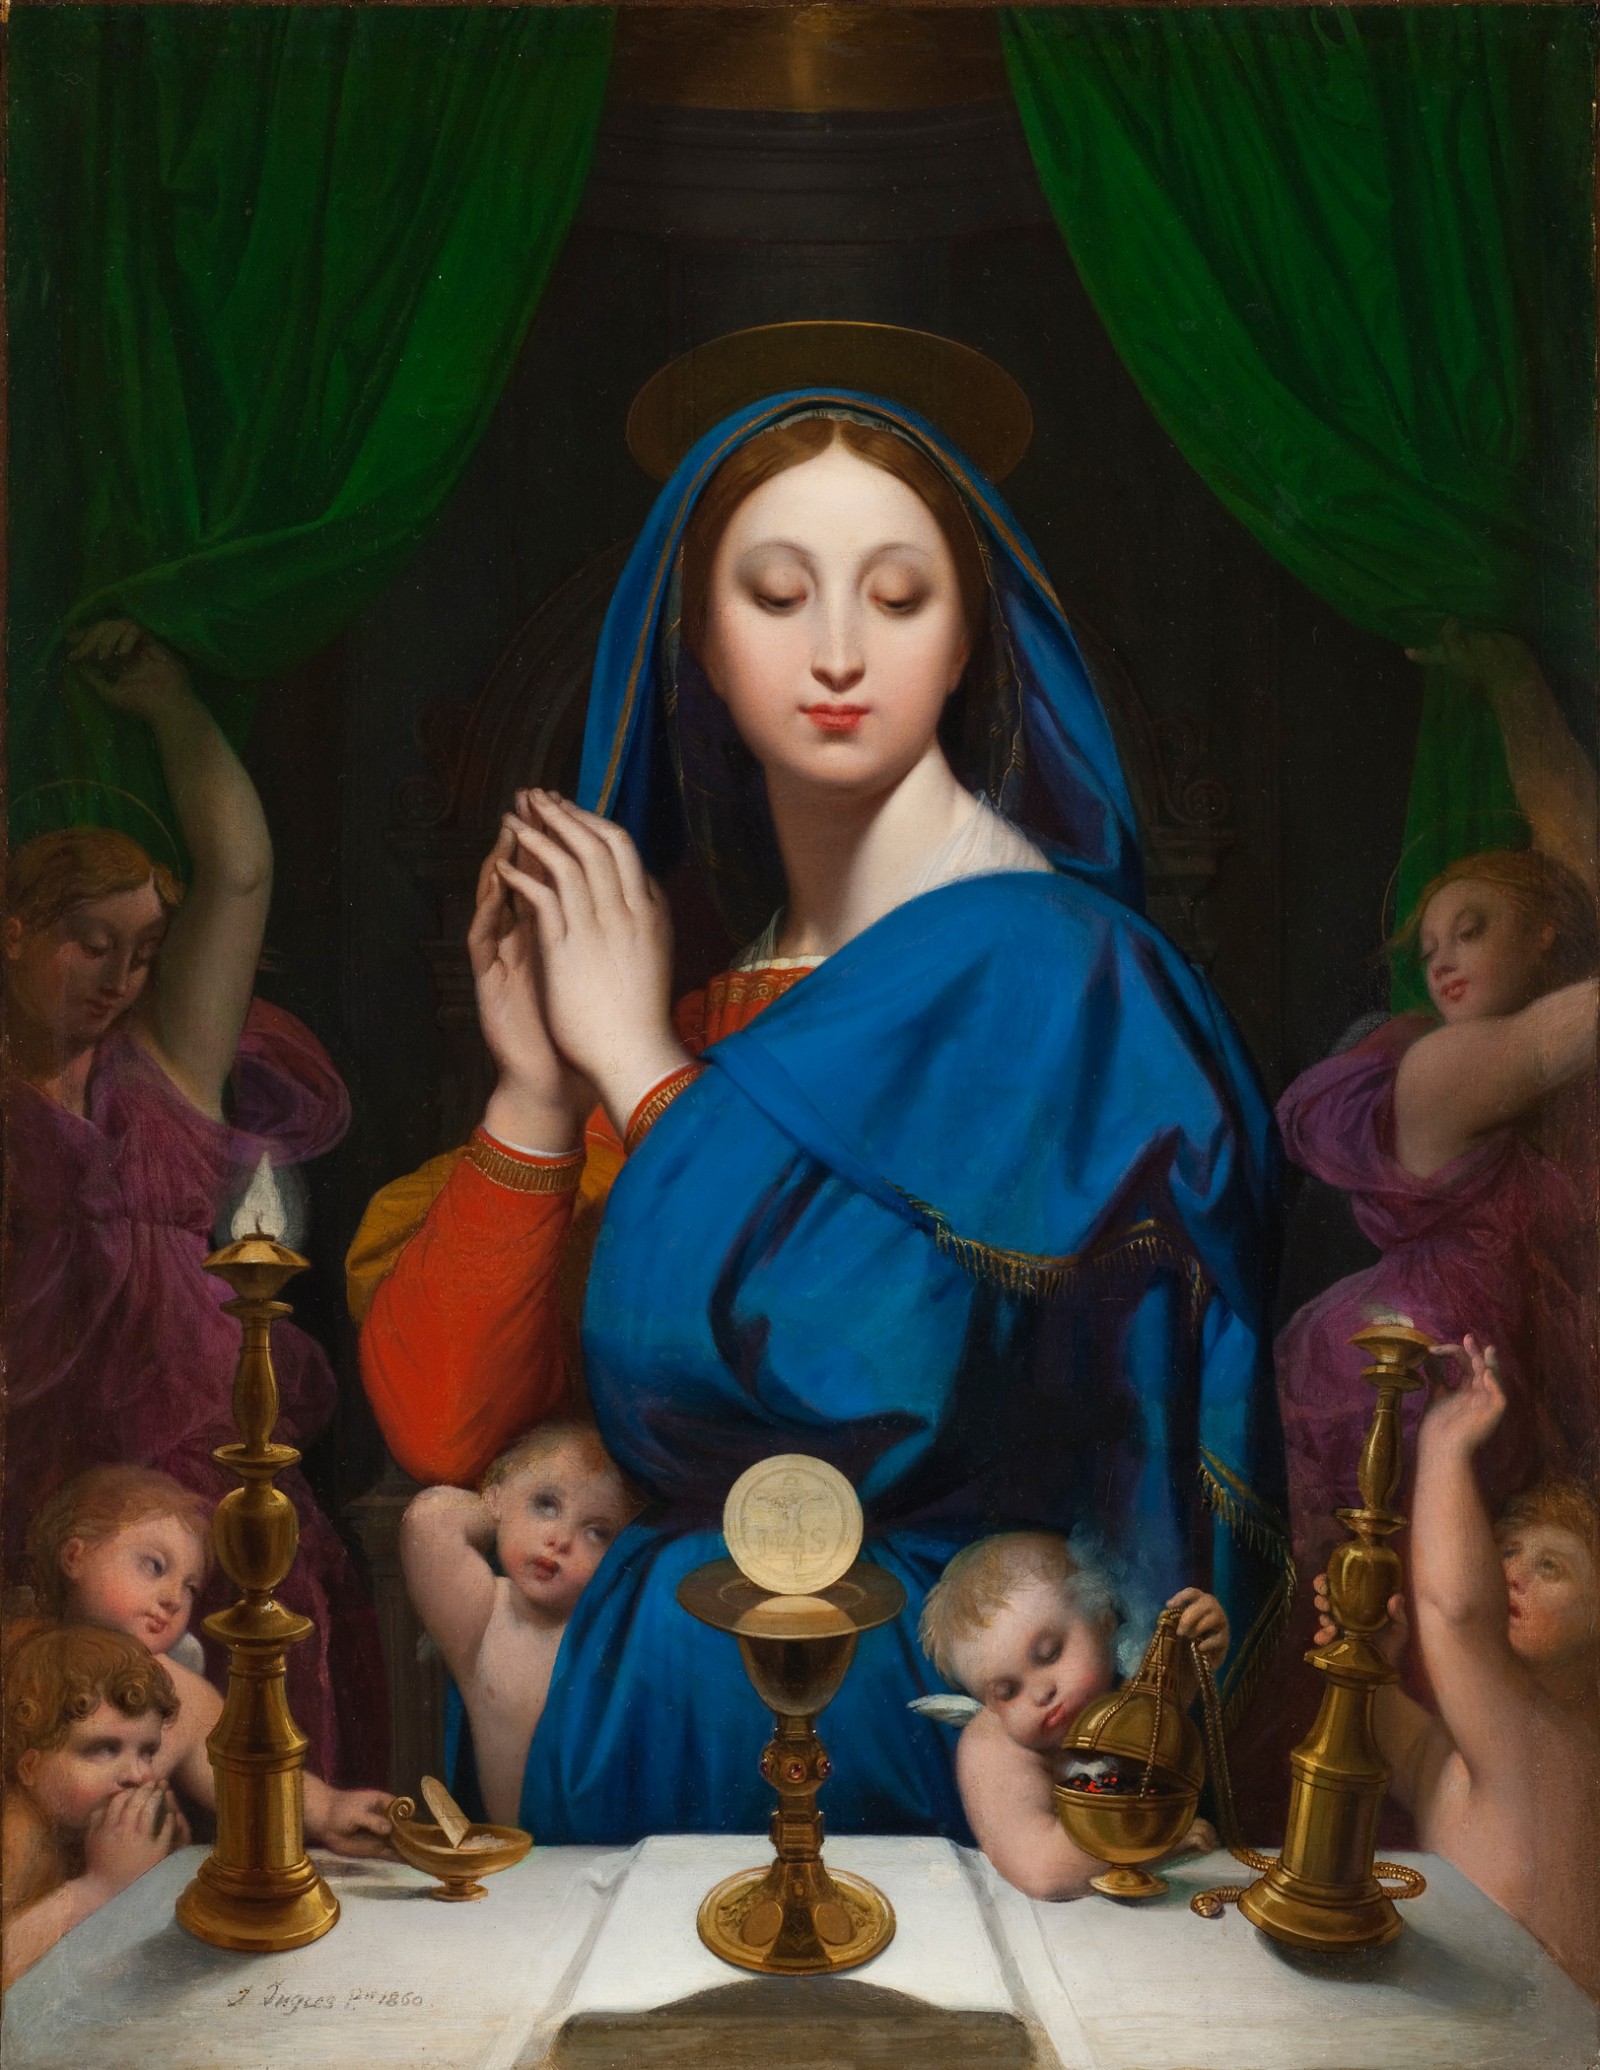 Image: Jean-Auguste-Dominique Ingres, The Virgin with the Host, 1860